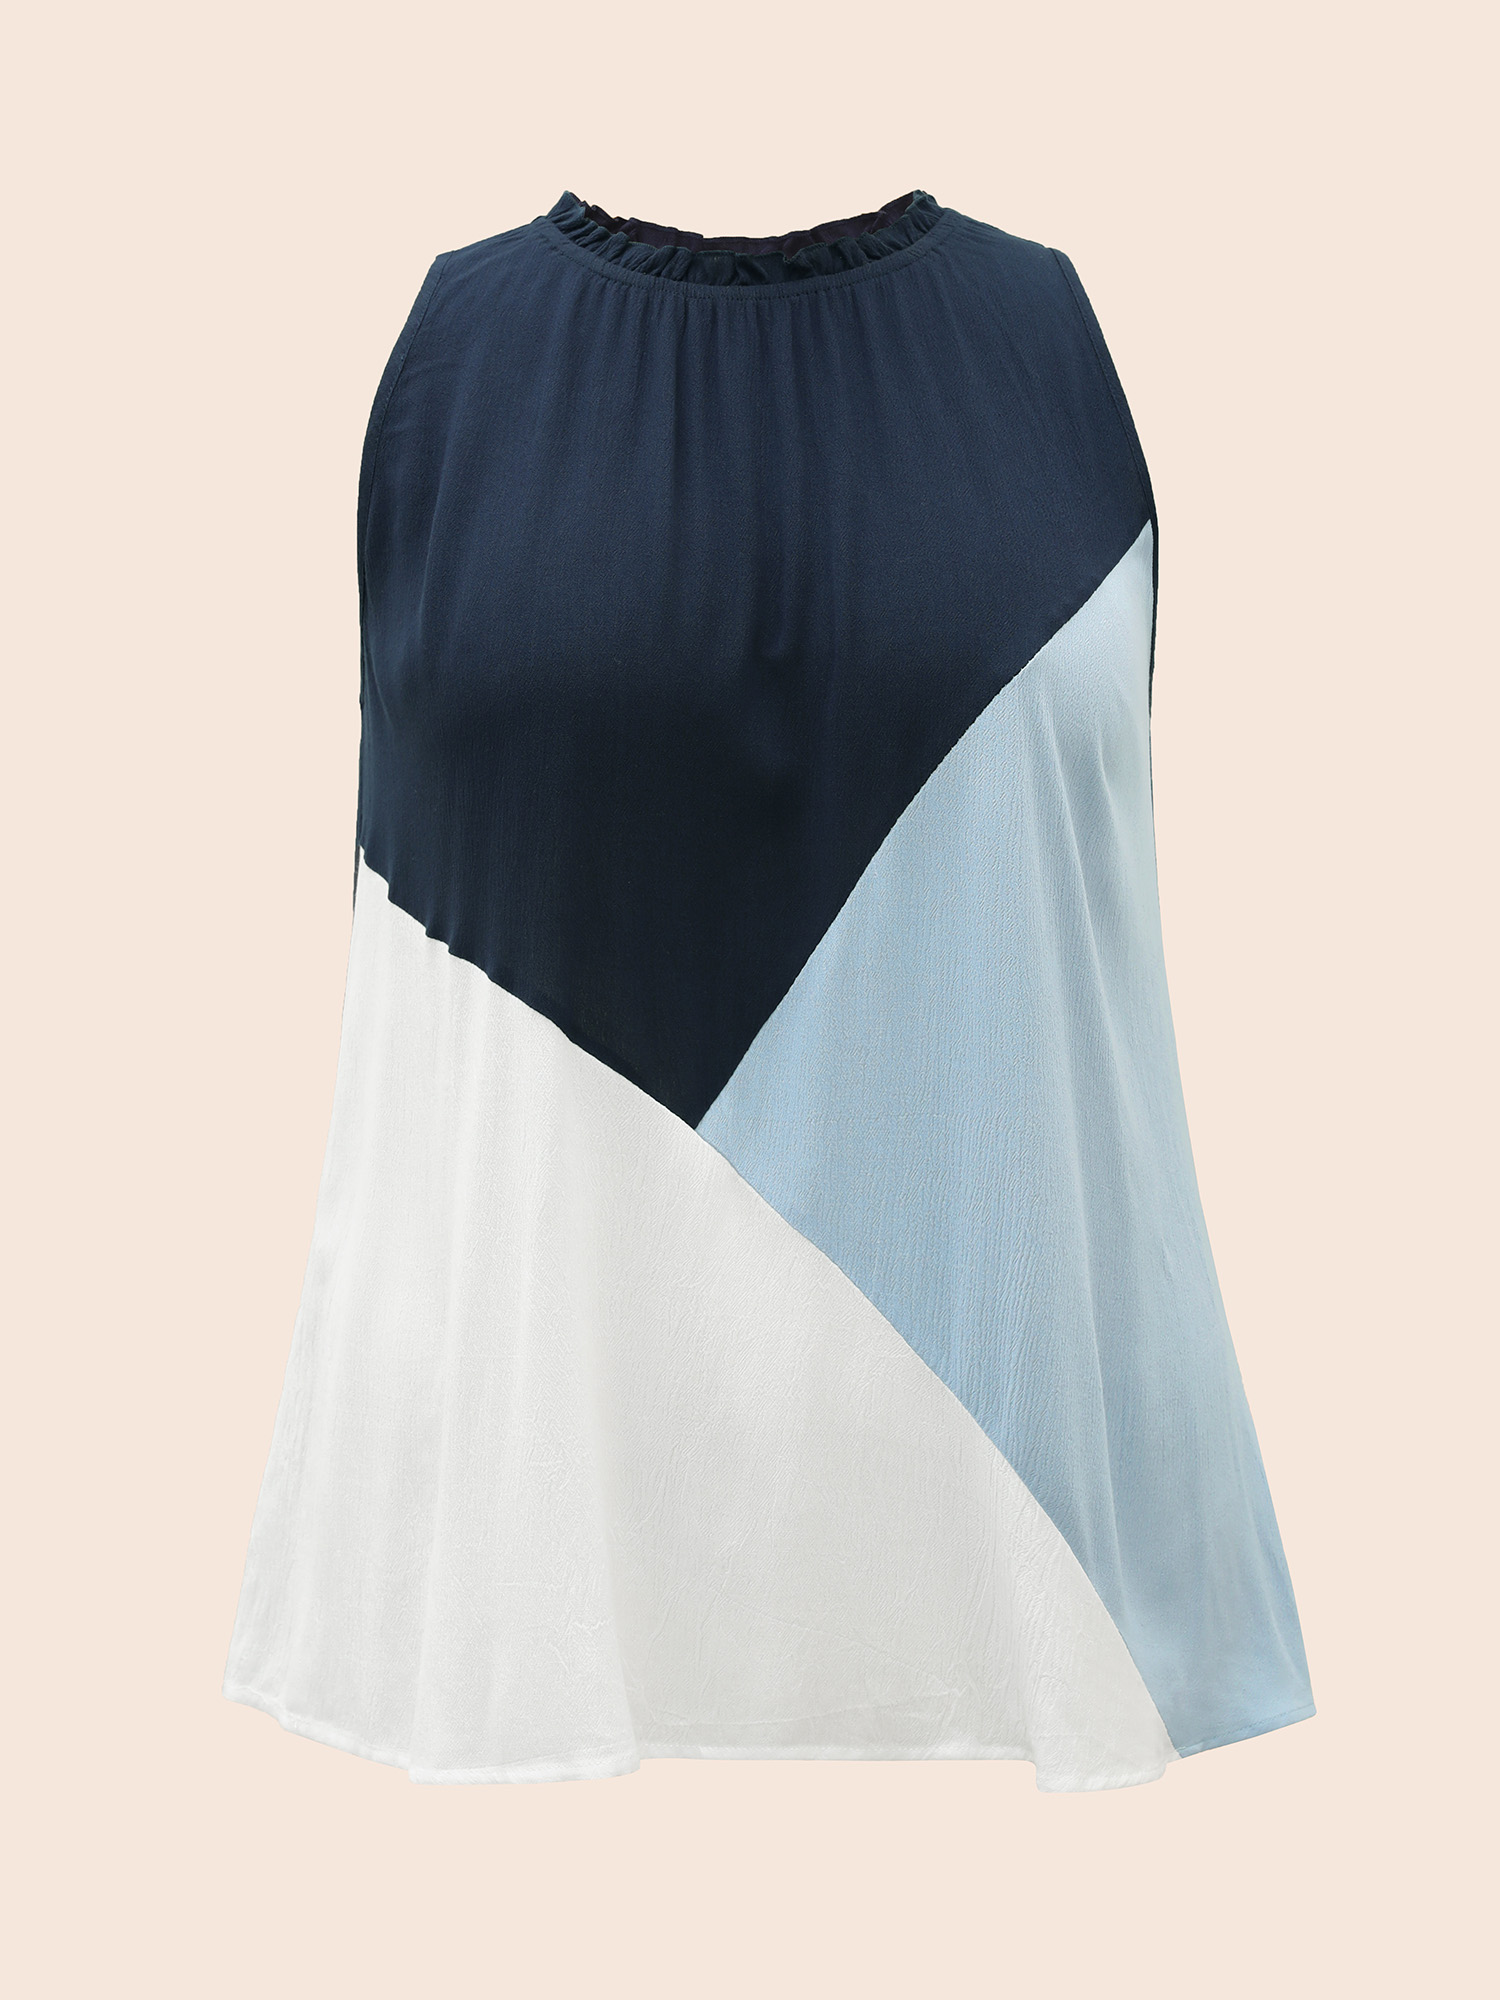 

Plus Size Colorblock Contrast Frill Trim Gathered Tank Top Women DarkBlue Casual Contrast Mock Neck Everyday Tank Tops Camis BloomChic